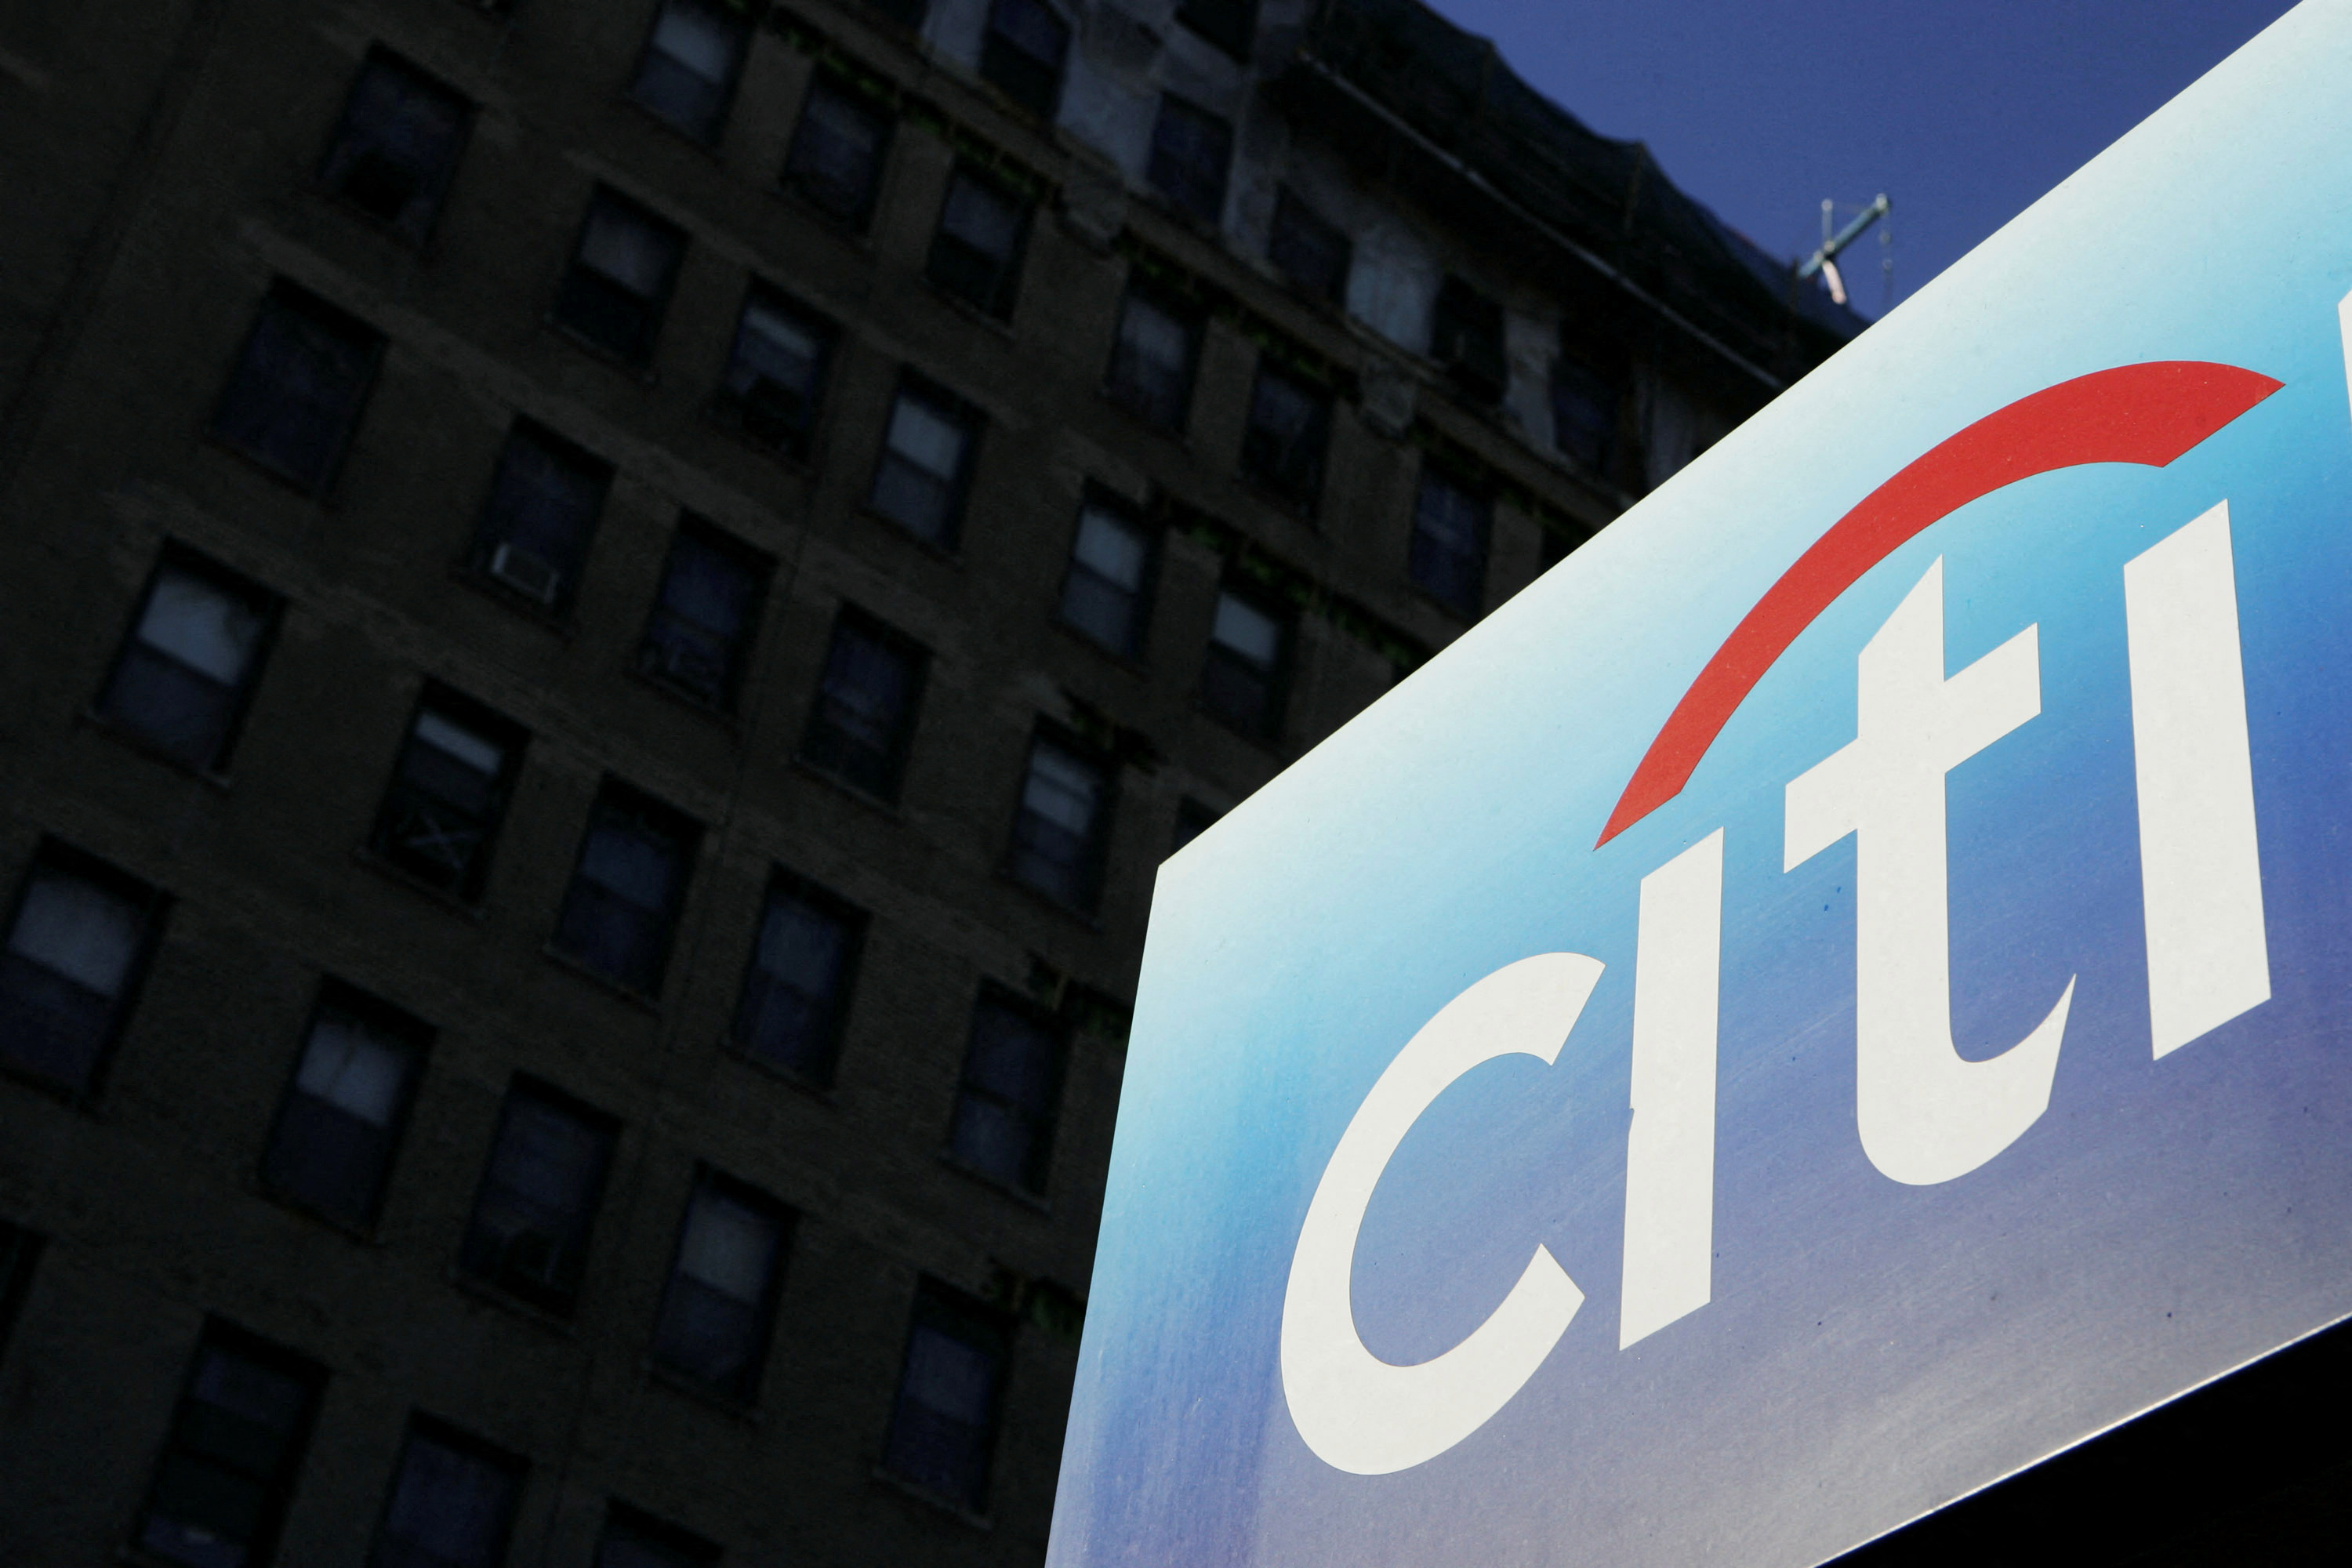 A Citibank sign is seen outside of a bank outlet in New York March 4, 2009. REUTERS/Lucas Jackson/File Photo